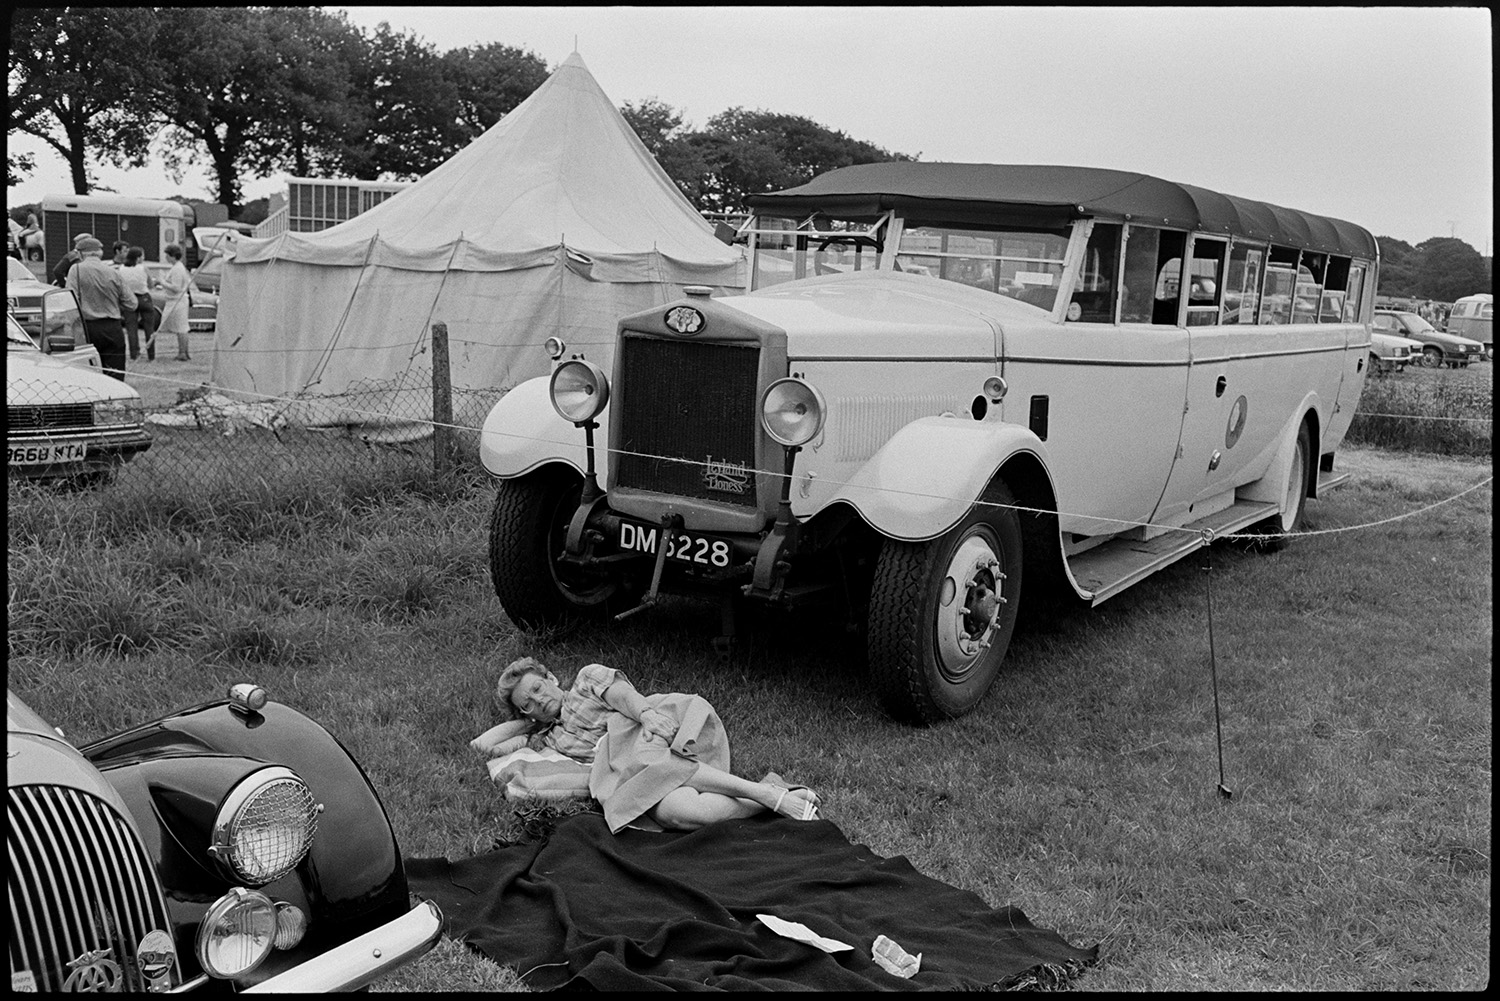 Gymkhana at Fair, horses, ponies and riders. Old bus. 
[A woman lying on a picnic rug in front of a charabanc  at Winkleigh Fair. A tent or small marquee can be seen in the background.]